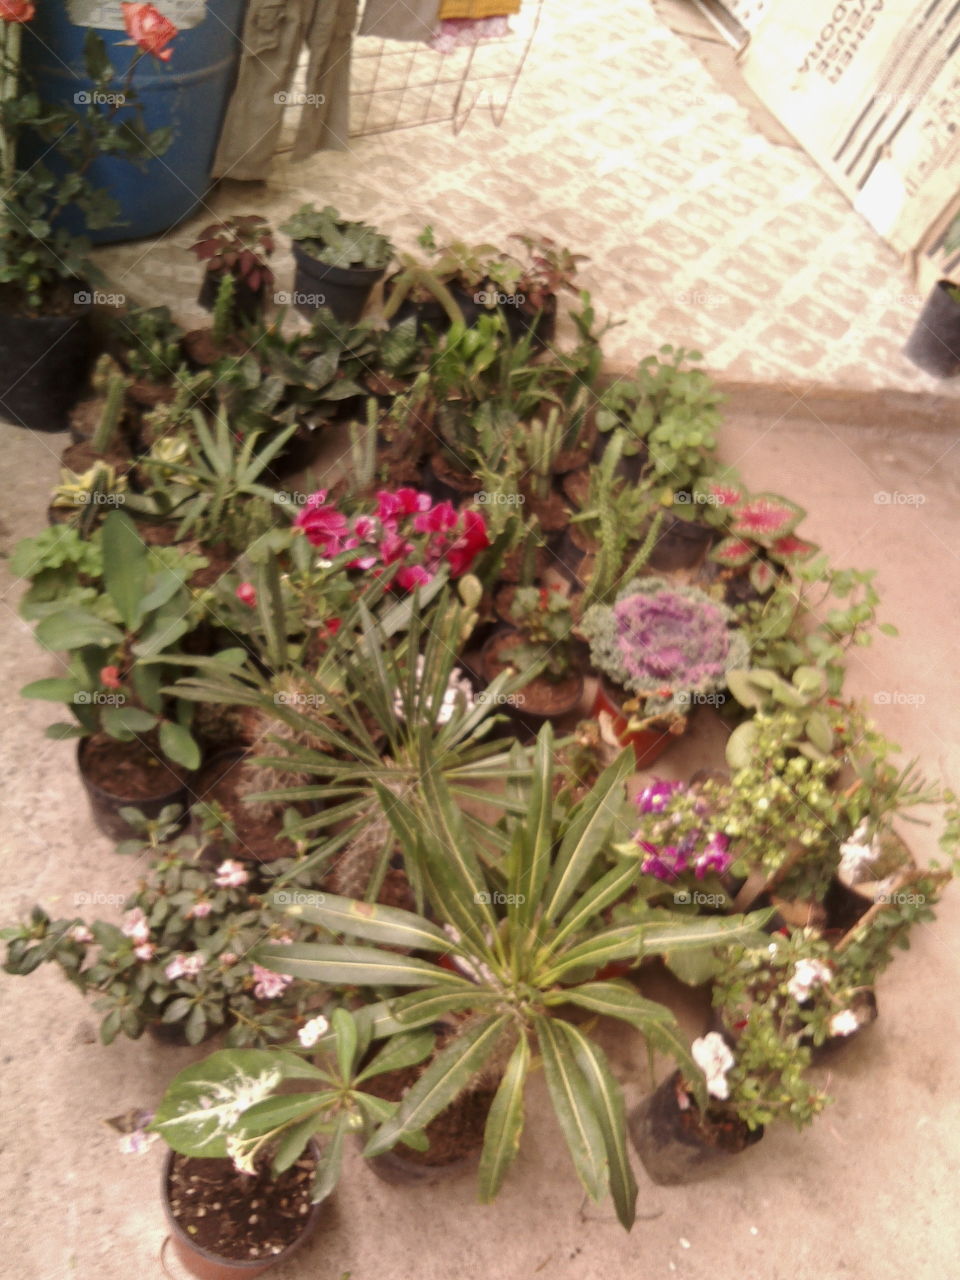 Nursery of tropical plants and cacti